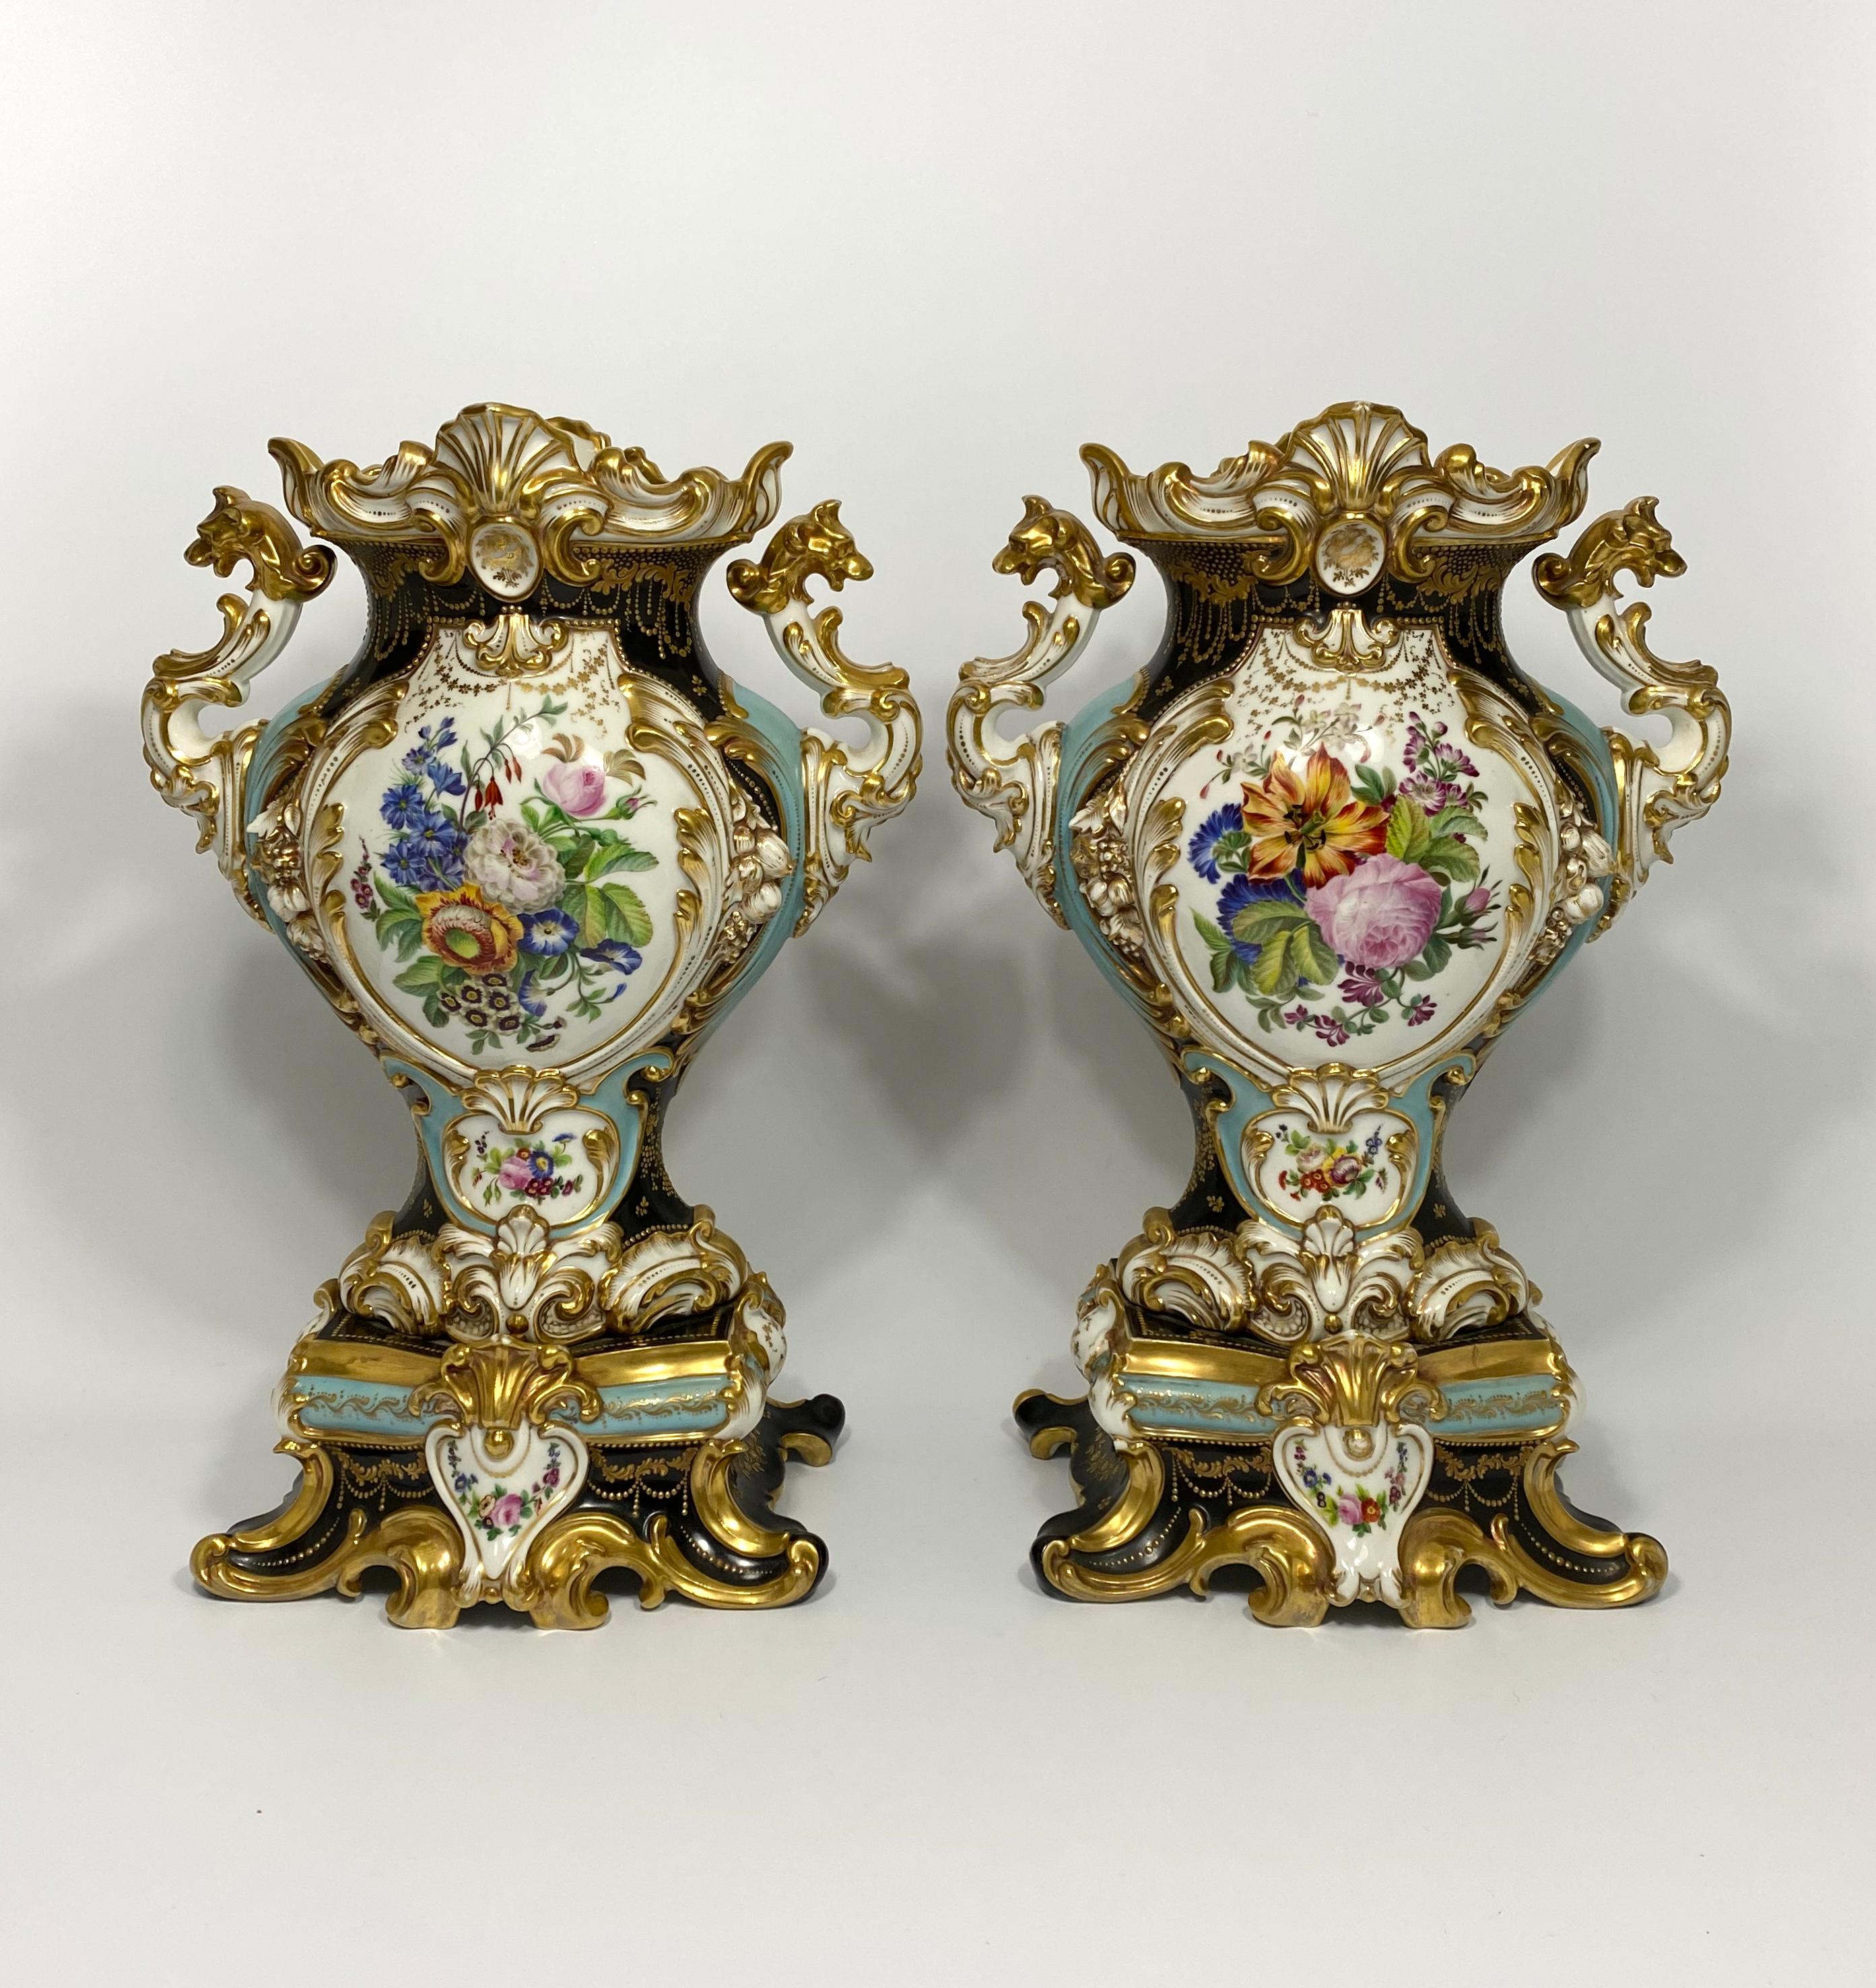 Victorian Pair of French Porcelain Vases, Probably Jacob Petit, circa 1840